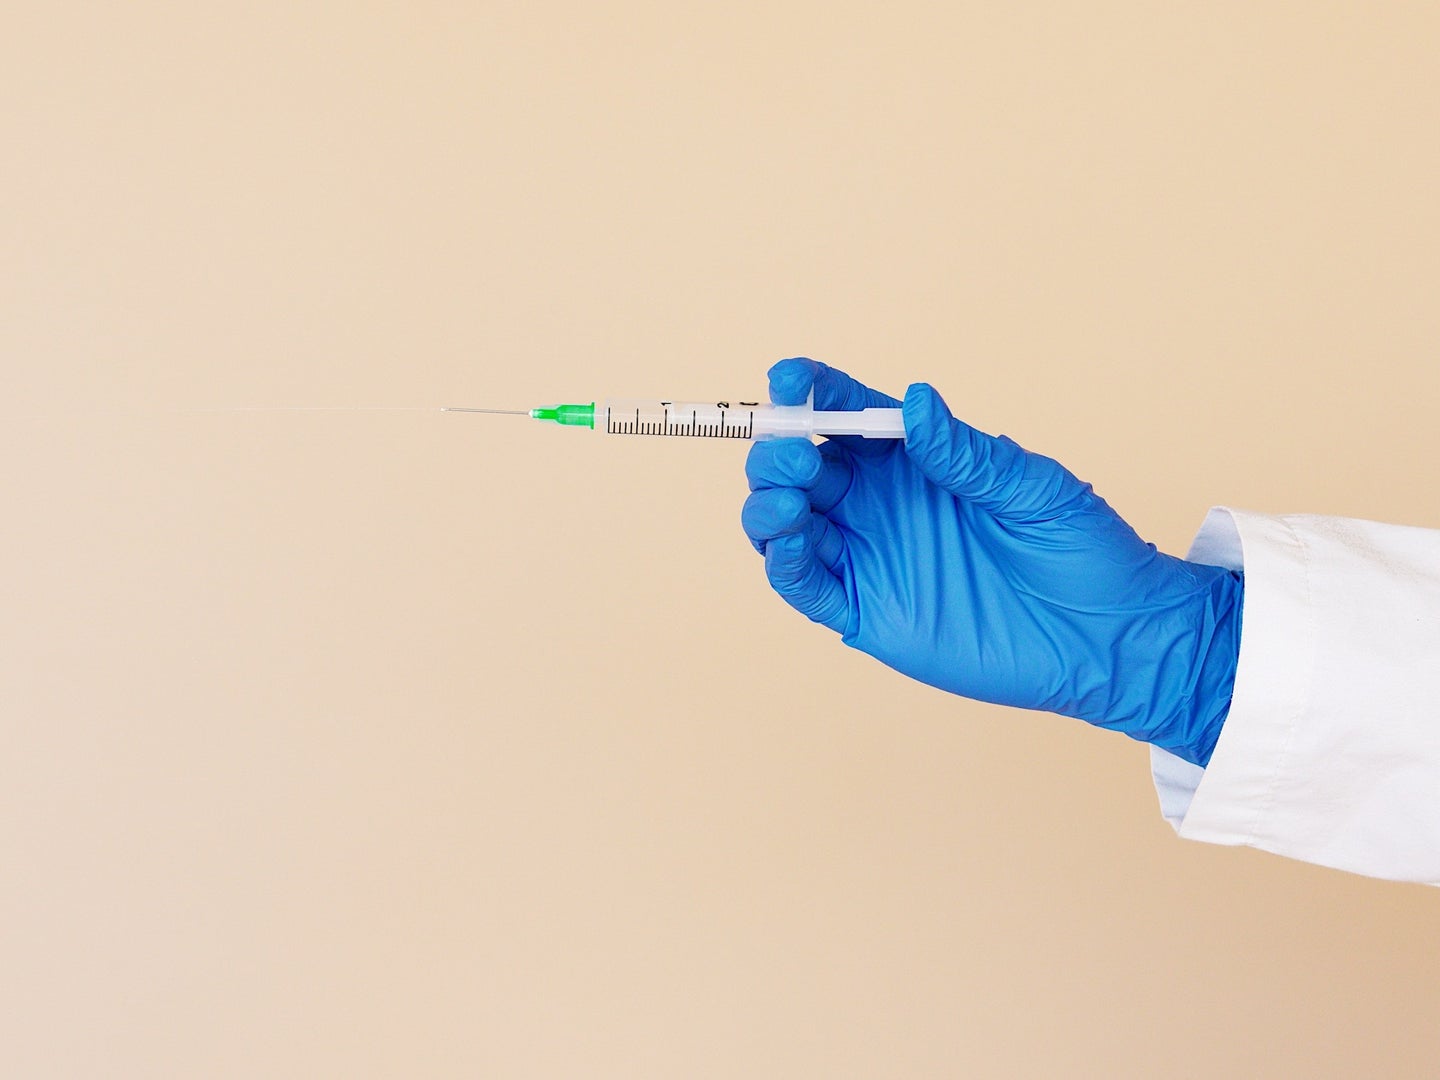 vaccine syringe held out by a gloved hand